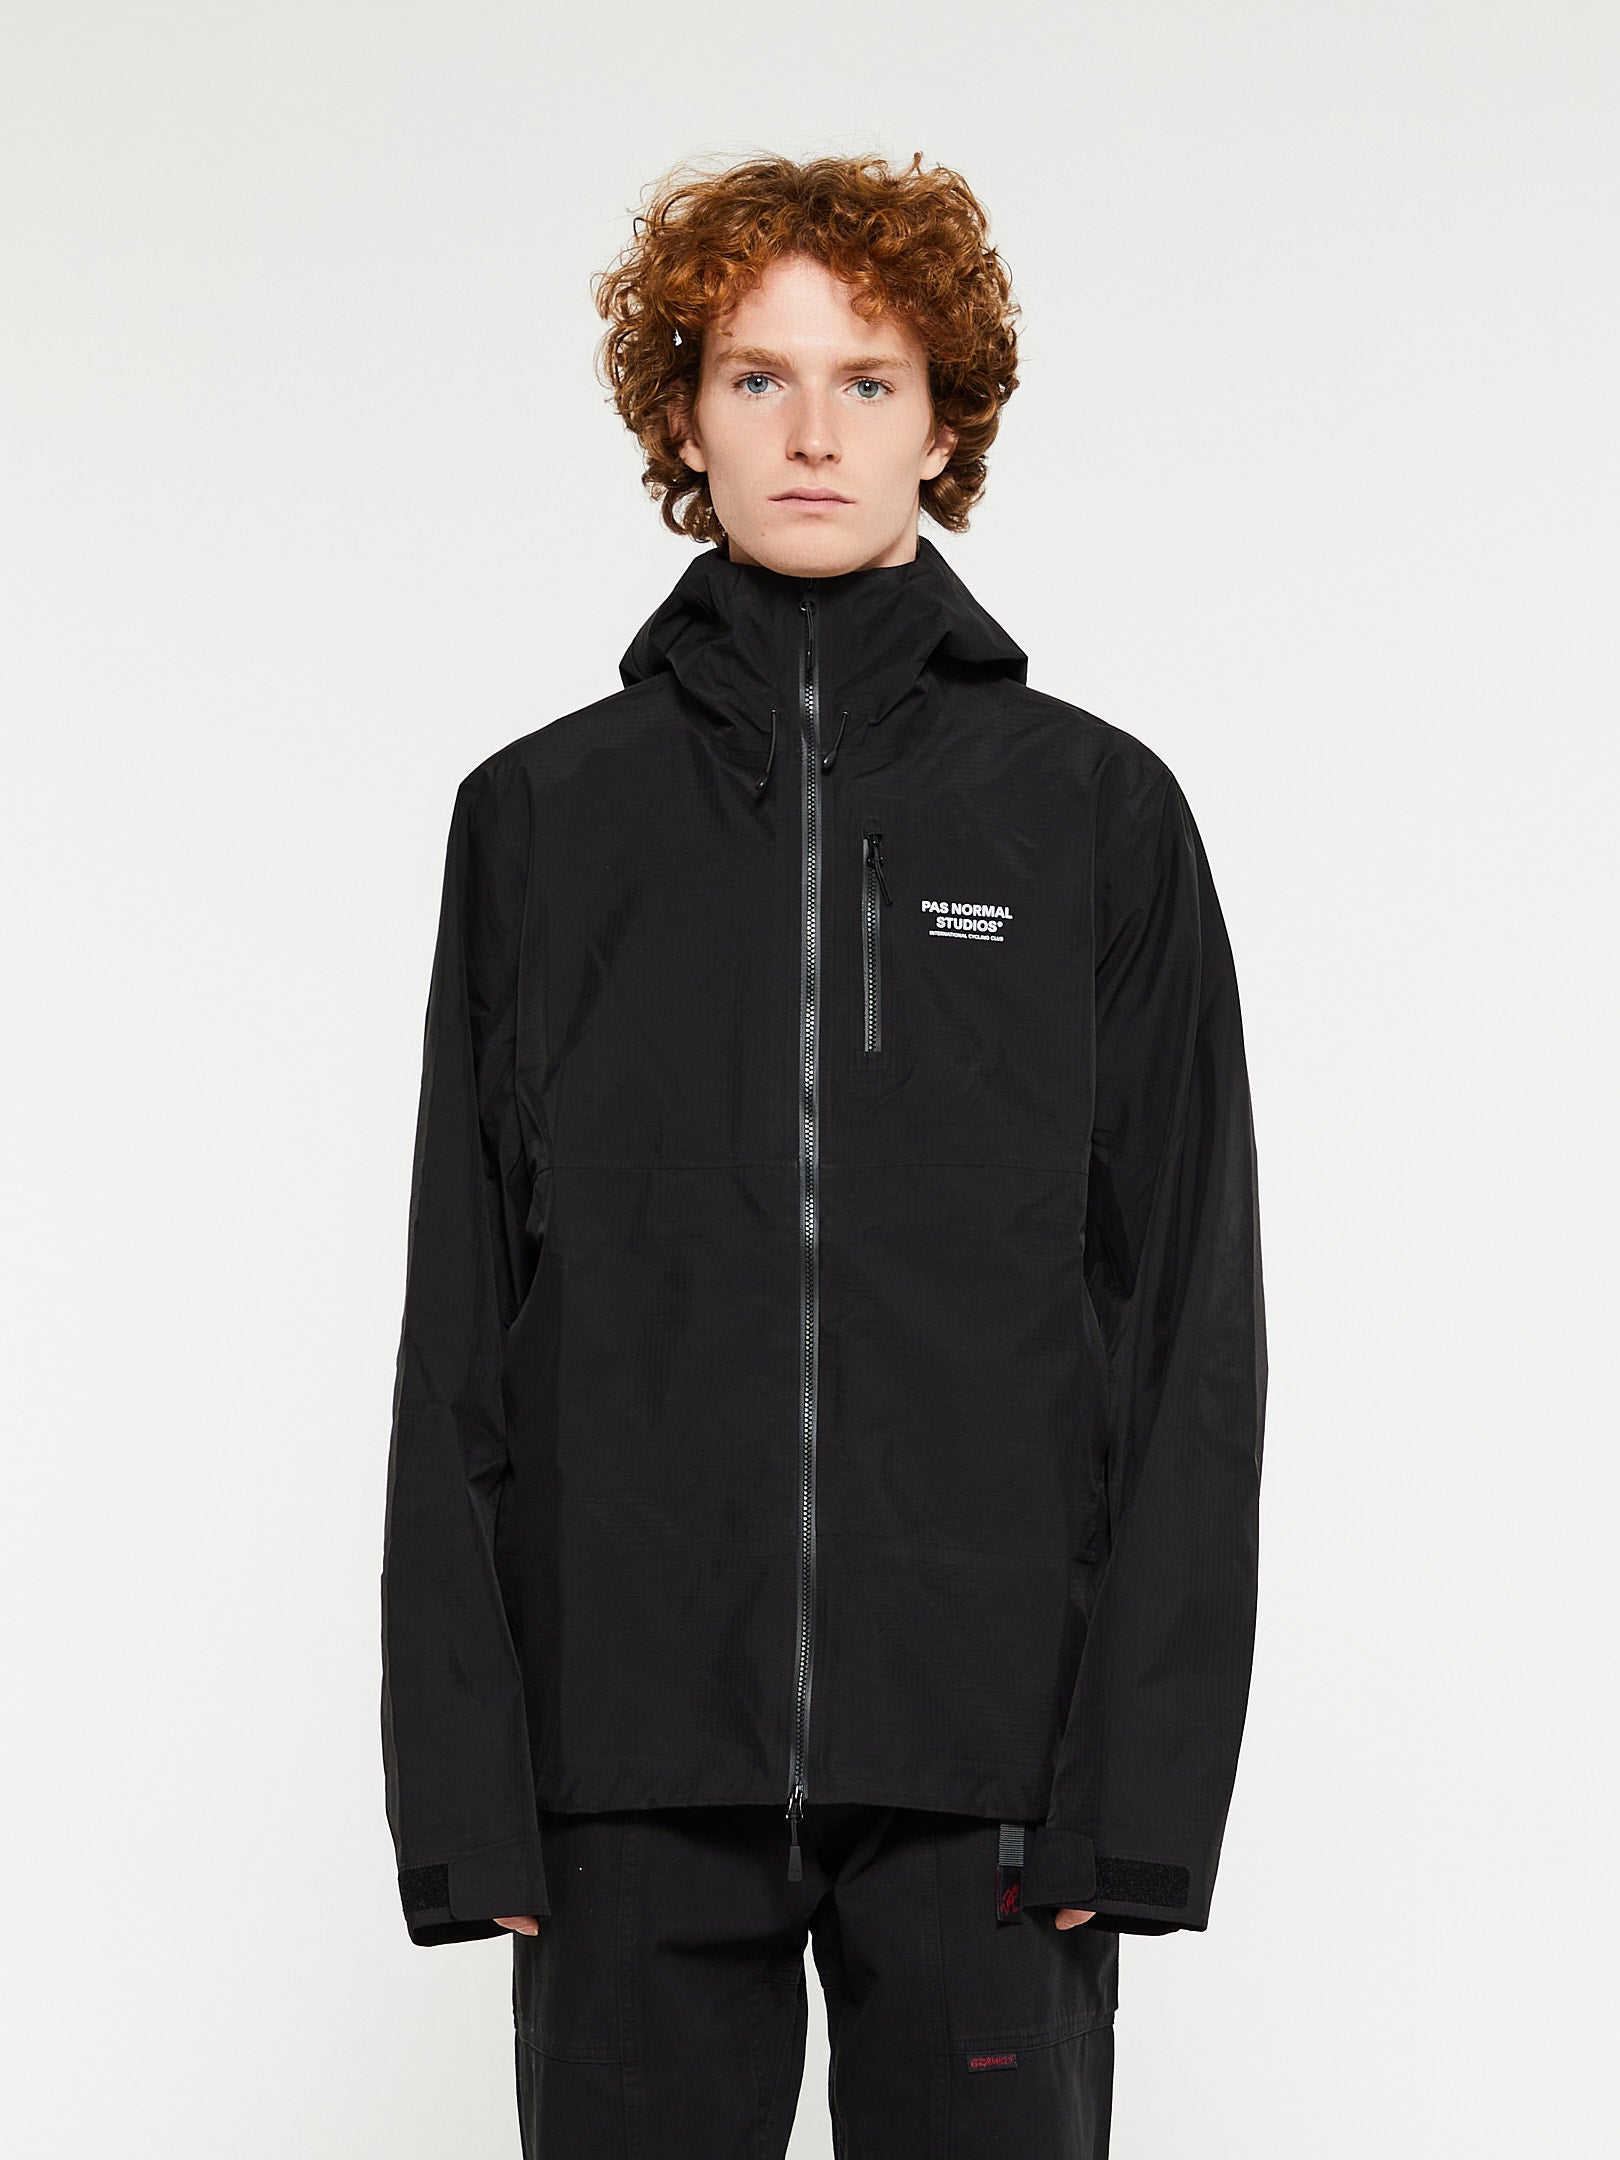 Black Off-Race Shell - Pas in – Normal stoy Jacket Studios